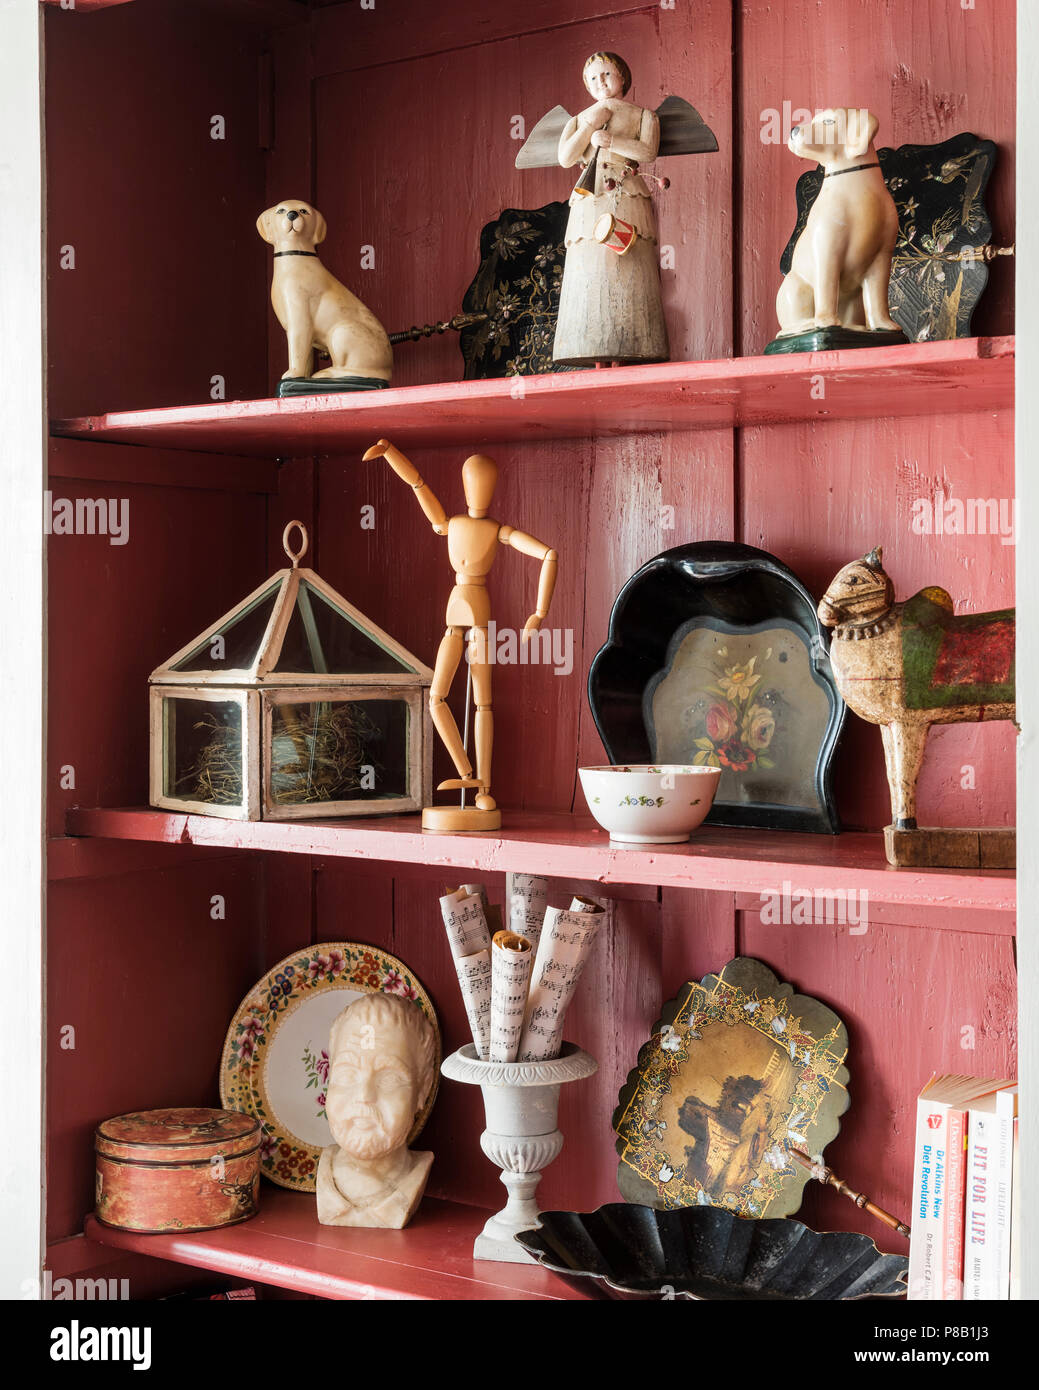 Ornaments and figurines on pink painted shelves Stock Photo